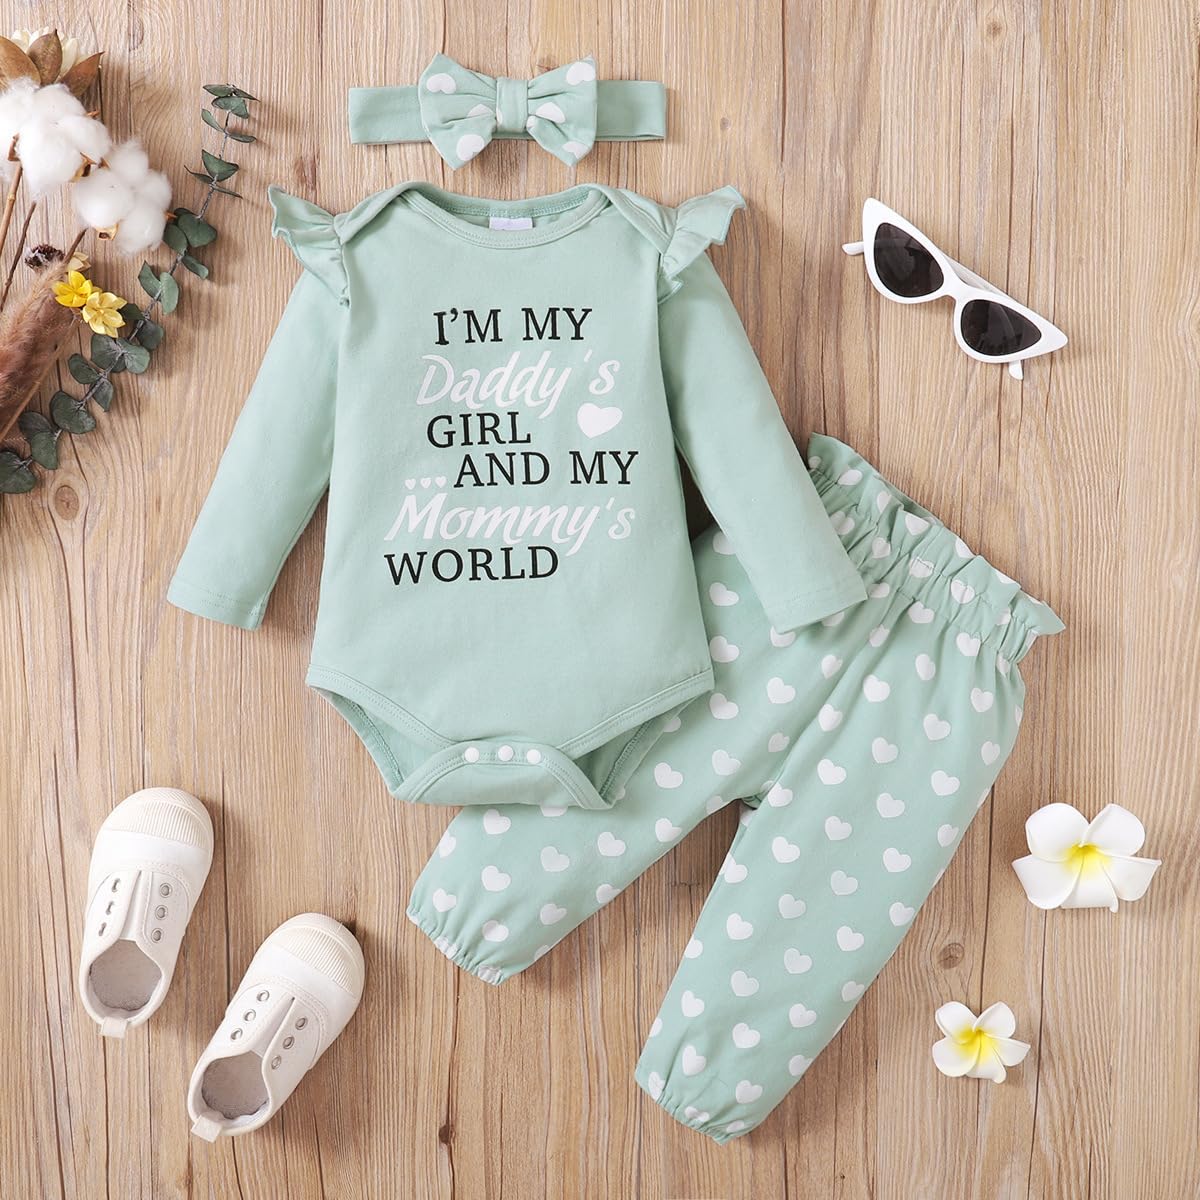 Edelqual Newborn Girl Outfits Baby Girl Clothes Baby Girl Toddler Baby Girl Clothes Cute Baby Girl Ruffles Romper 3PC(3-6 M)